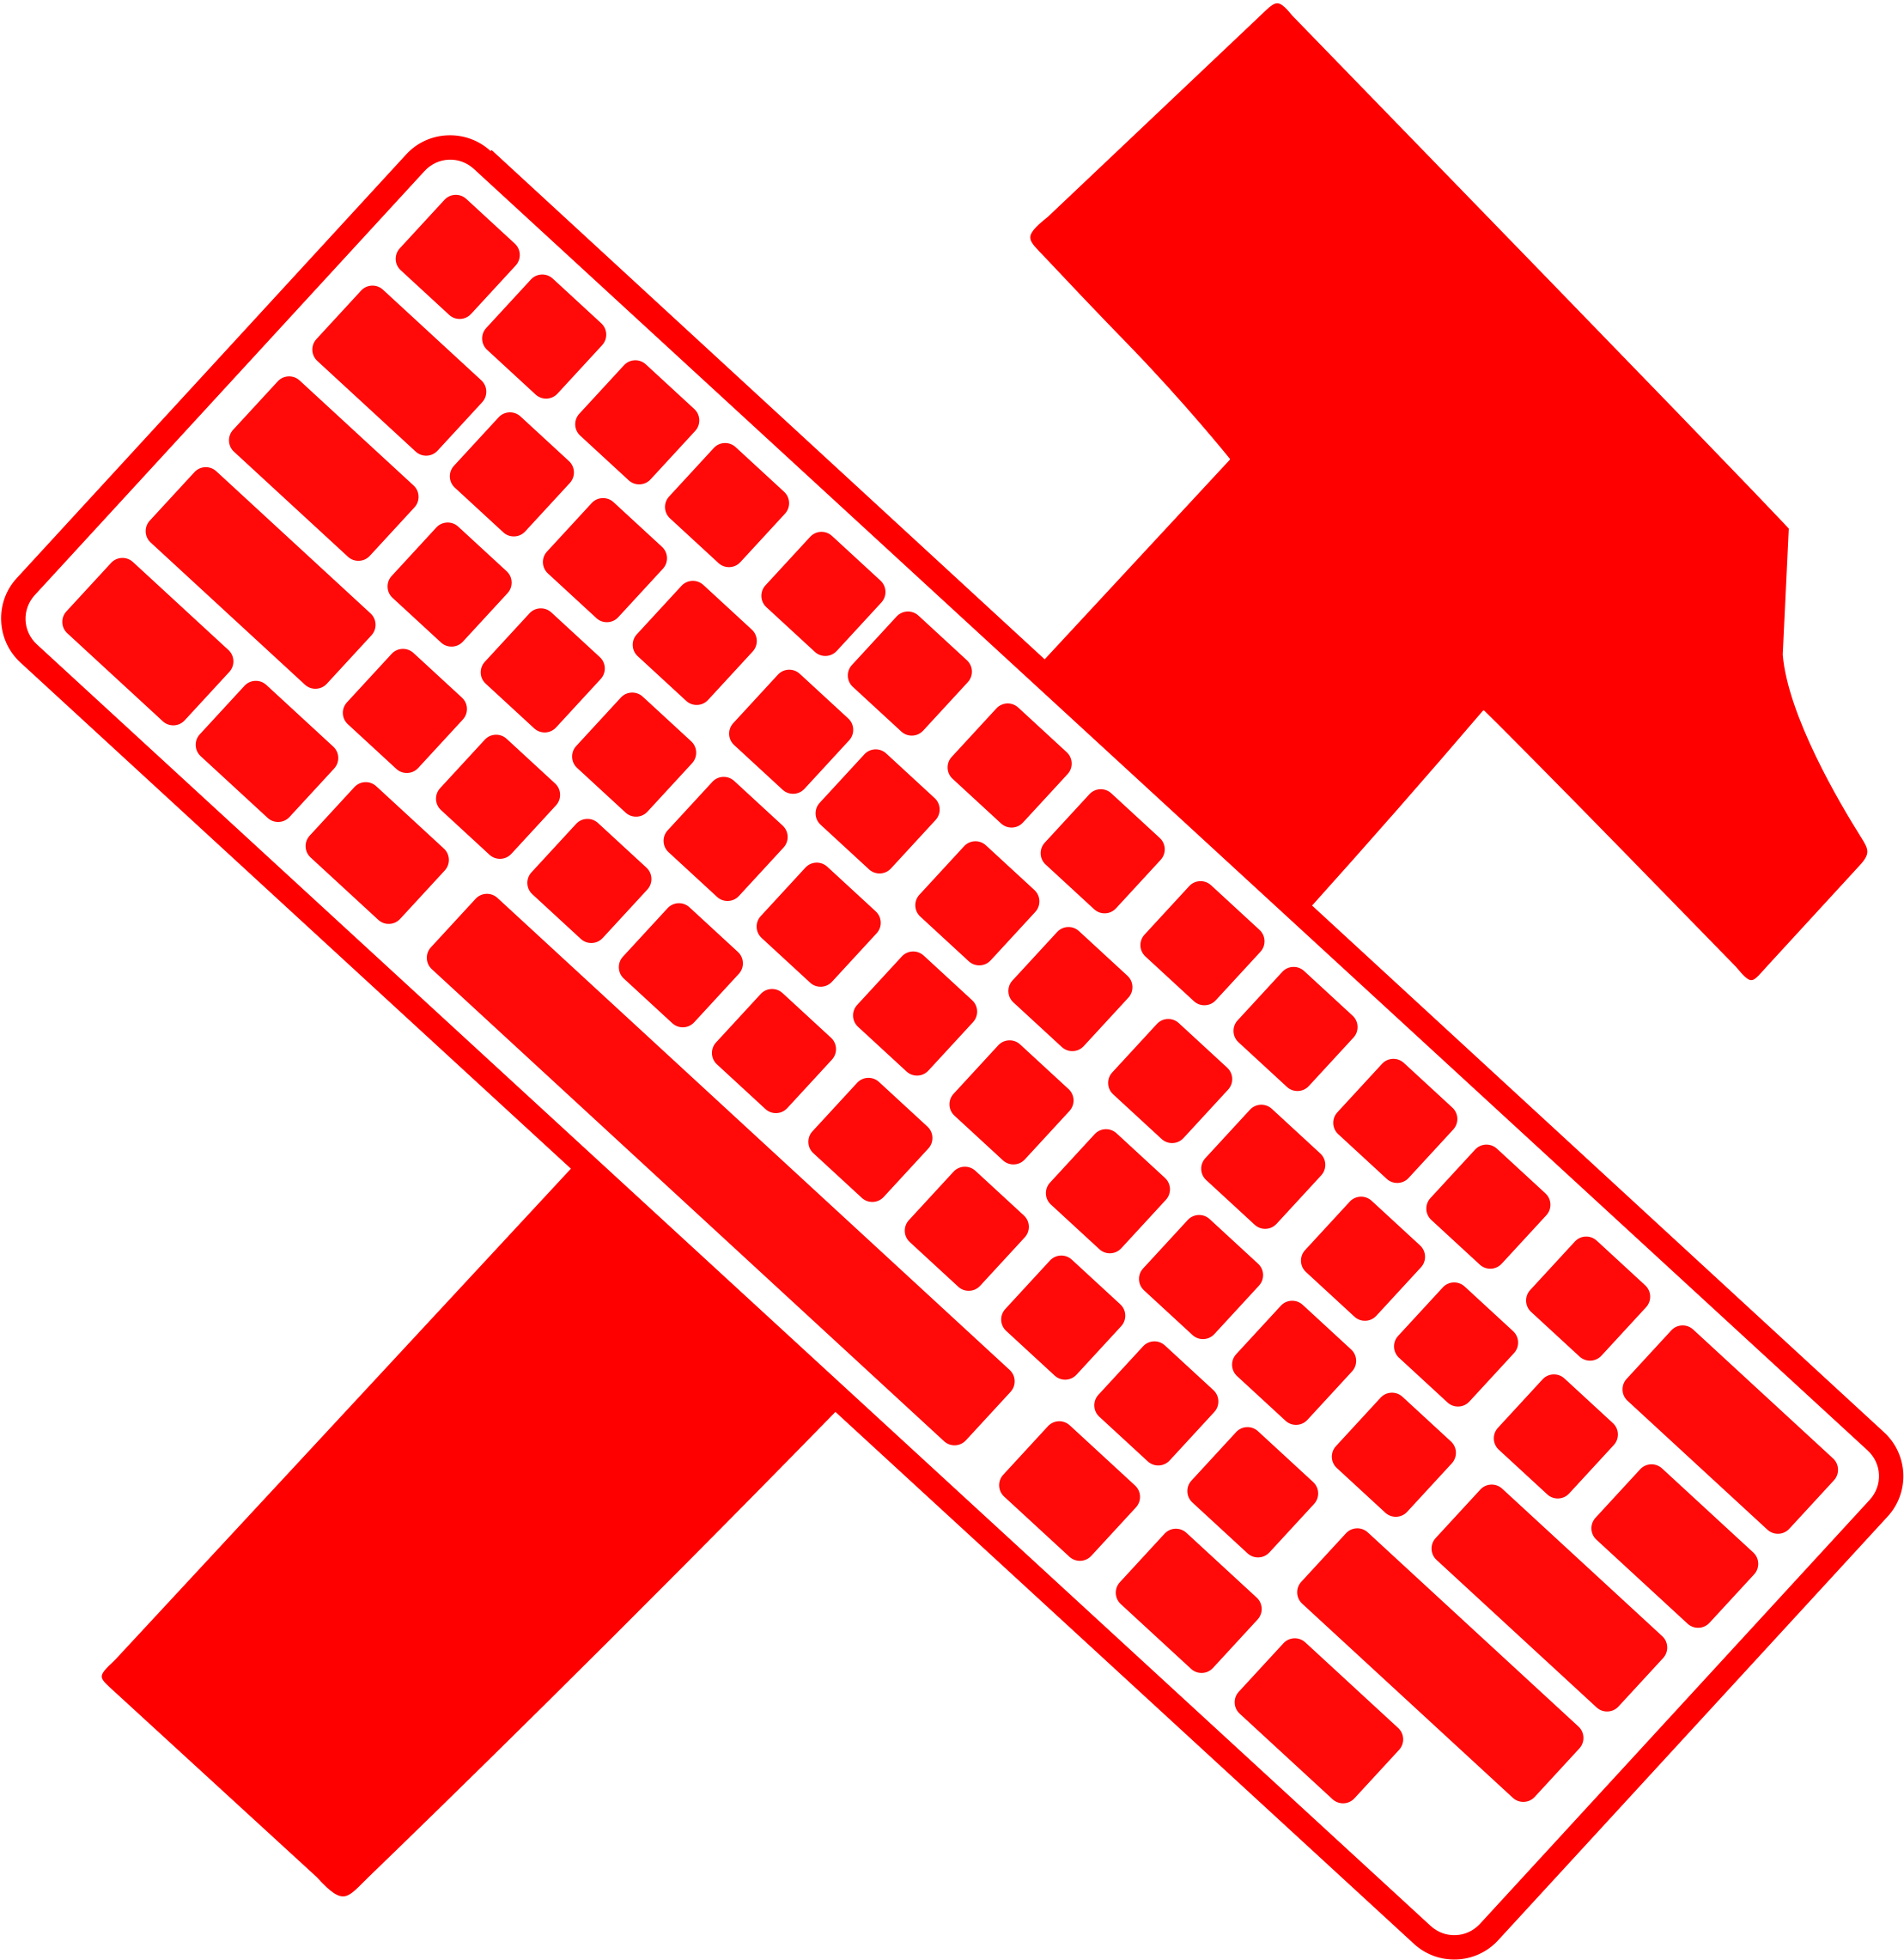 Mother Russia Finally Says “nyet” To Abortions Kind - Hammer And Sickle Keyboard (2331x2400)